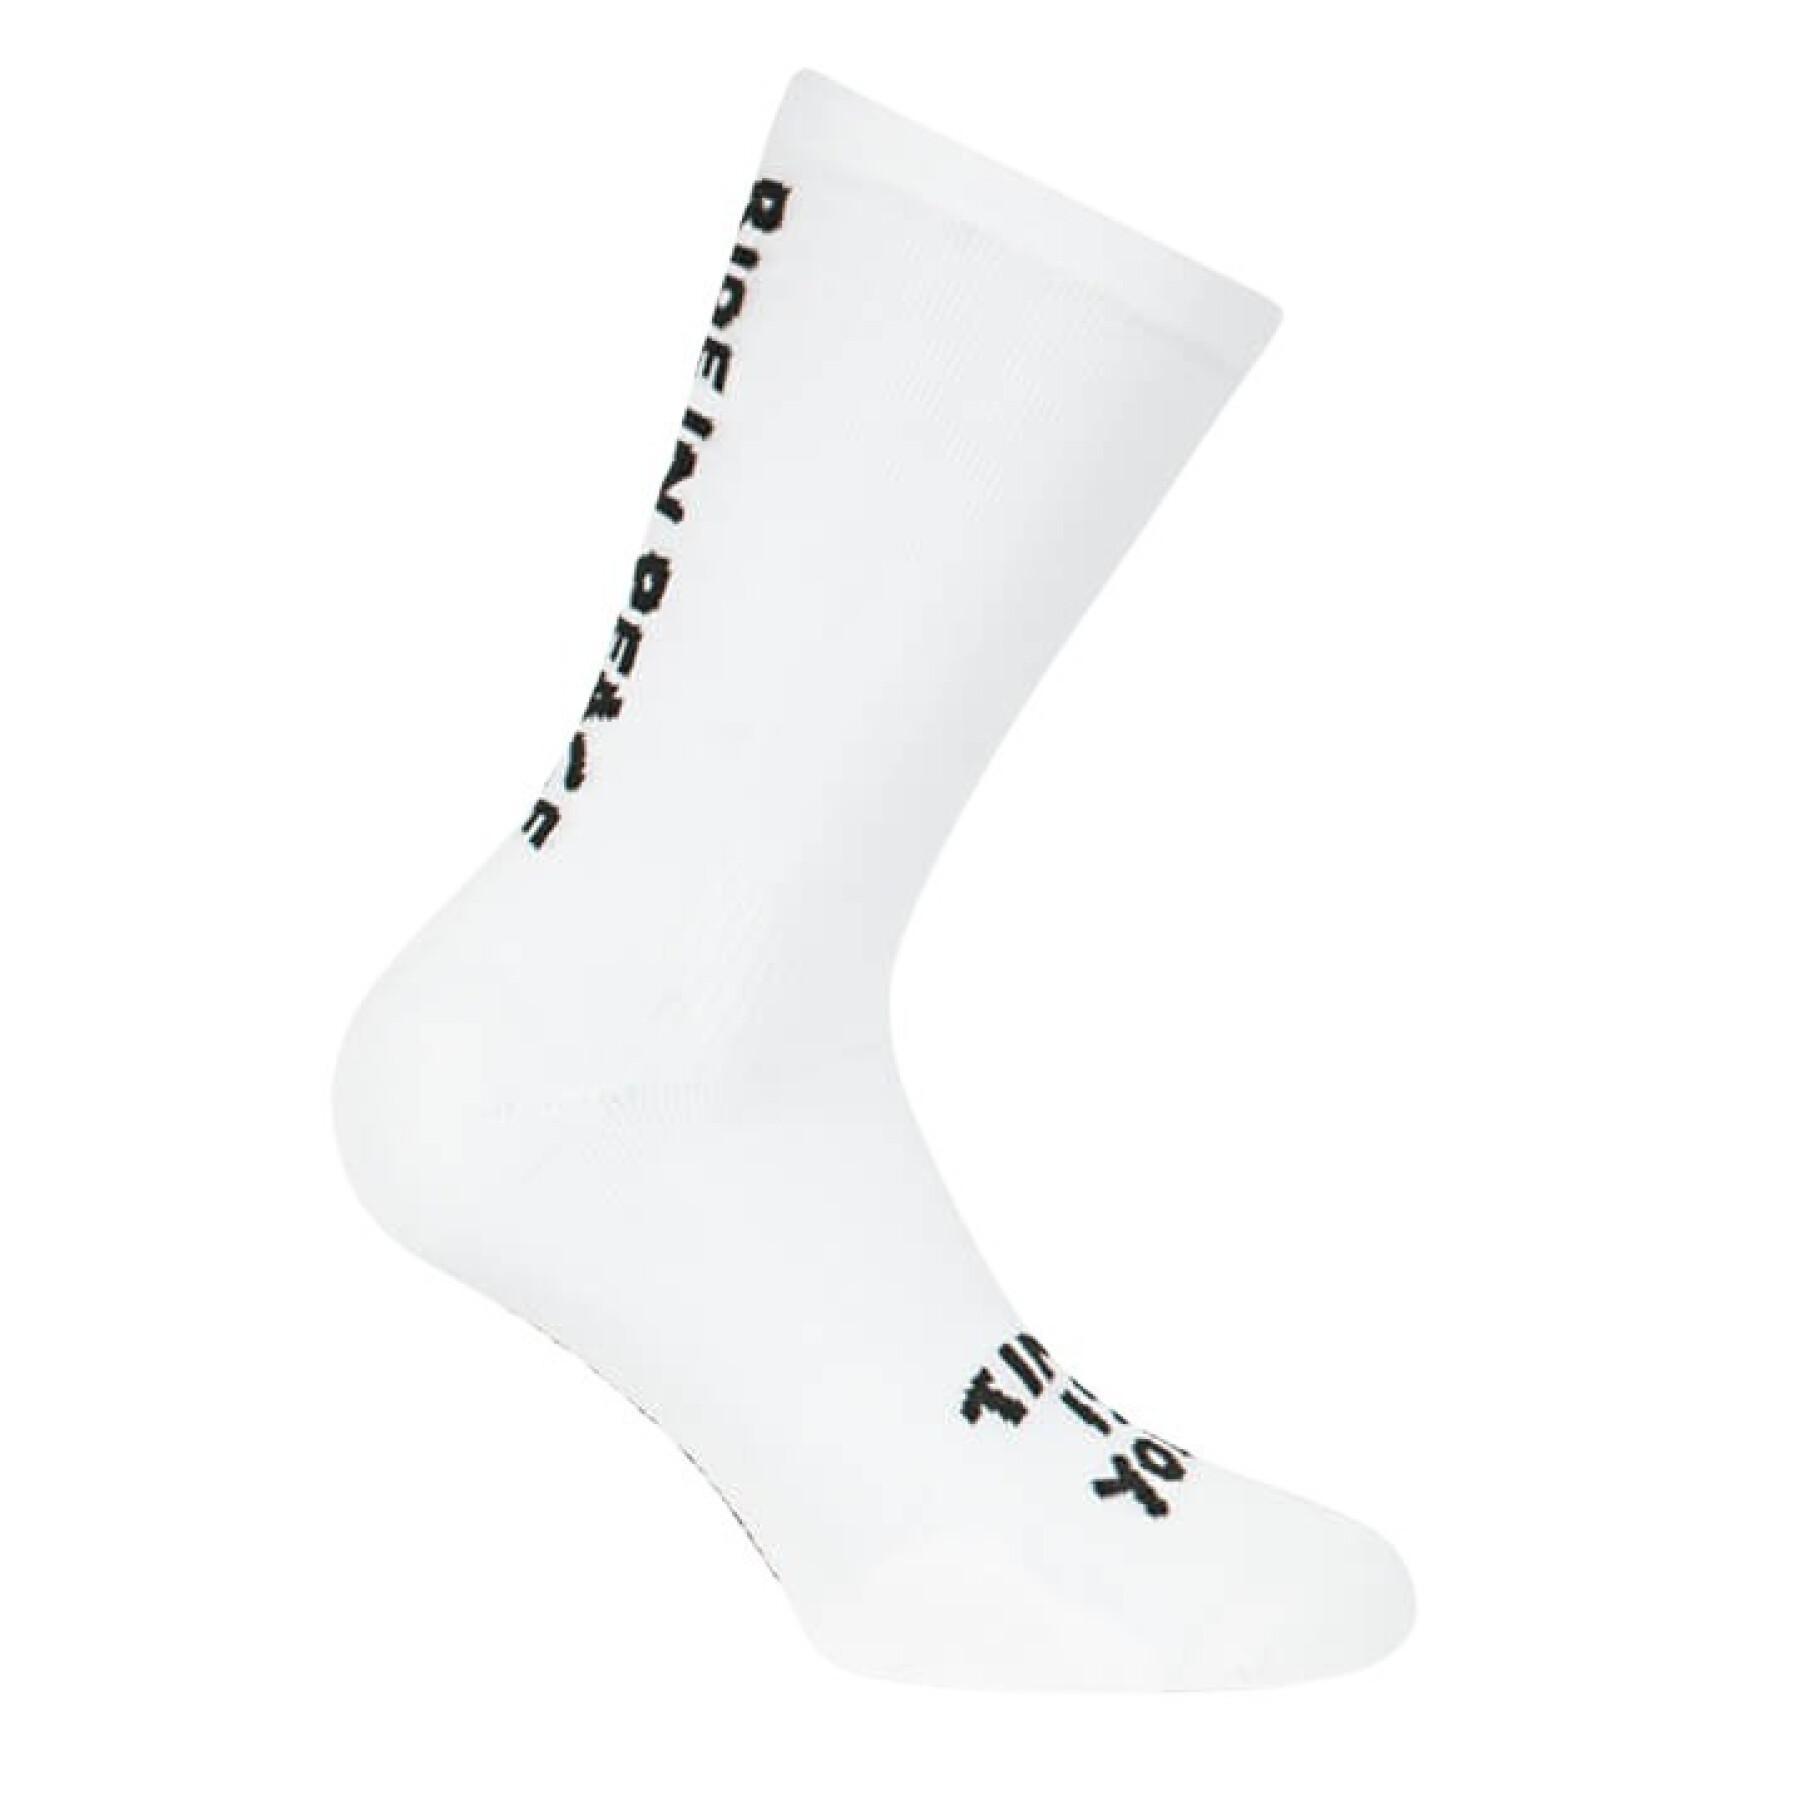 Performance Socks Pacific & Co Ride in peace